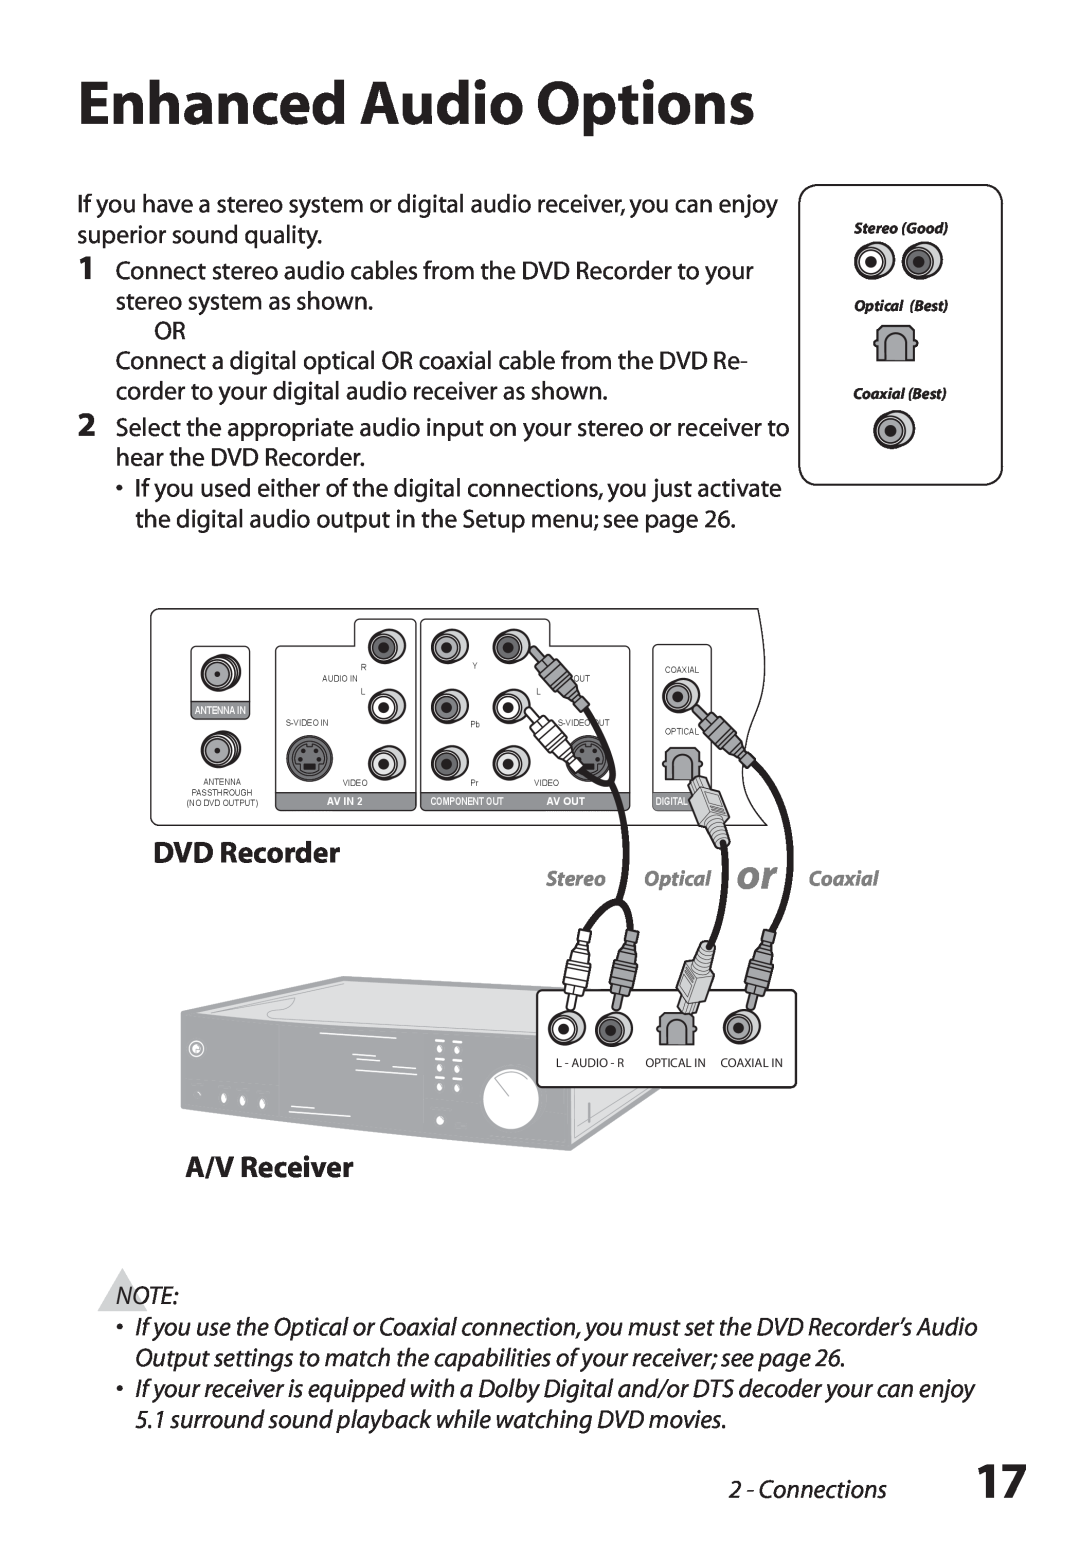 GoVideo R6750 manual Enhanced Audio Options, Connections 